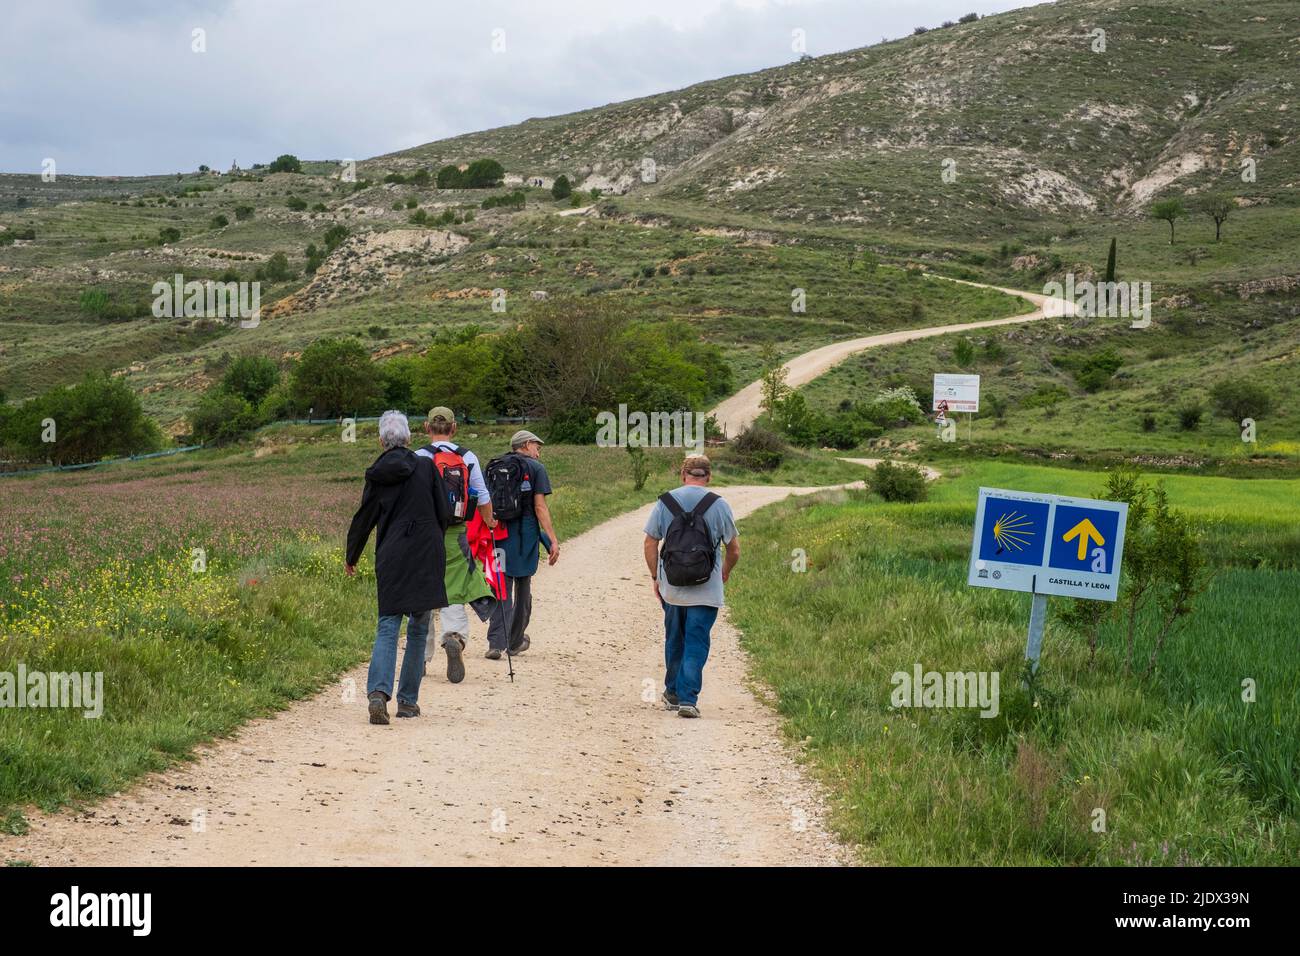 Spain, Camino de Santiago, leaving Castrojeriz. Signs or Markers bearing Arrows and Scallop Shells Point the Way to the Camino. Stock Photo